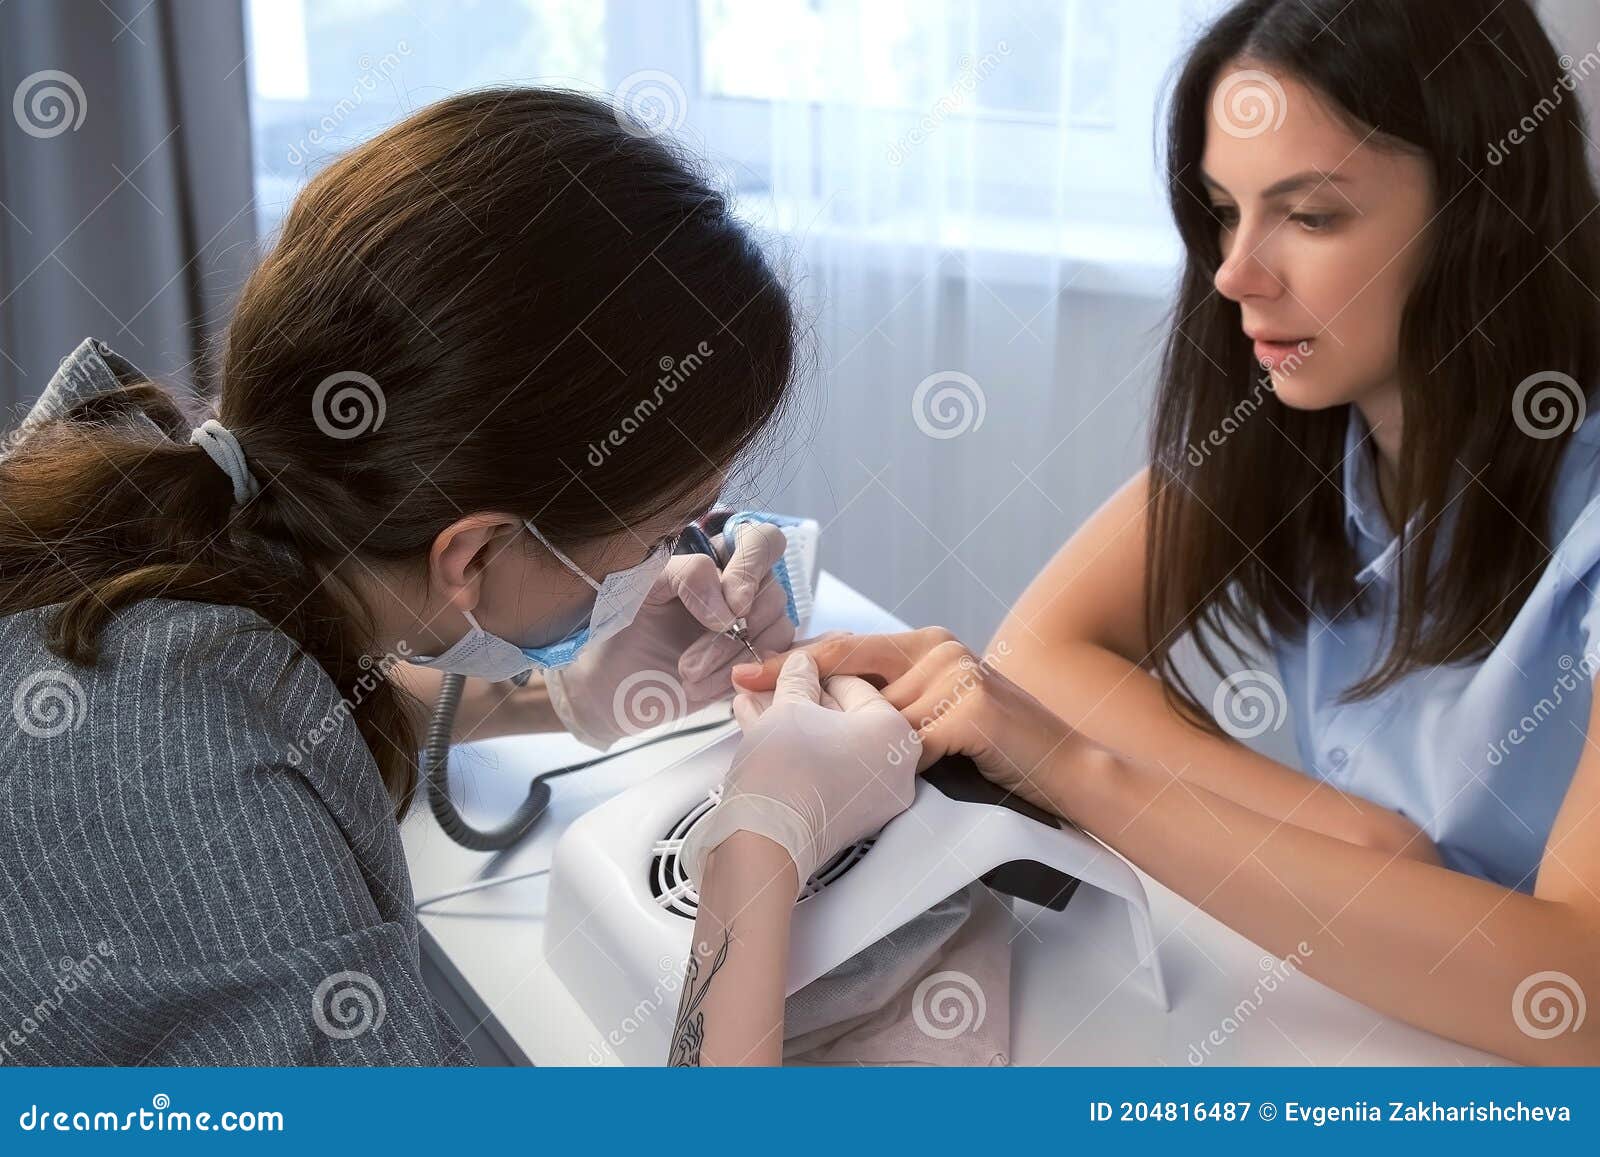 woman manicurist in mask cleaning pterygium on client`s nail using apparatus.